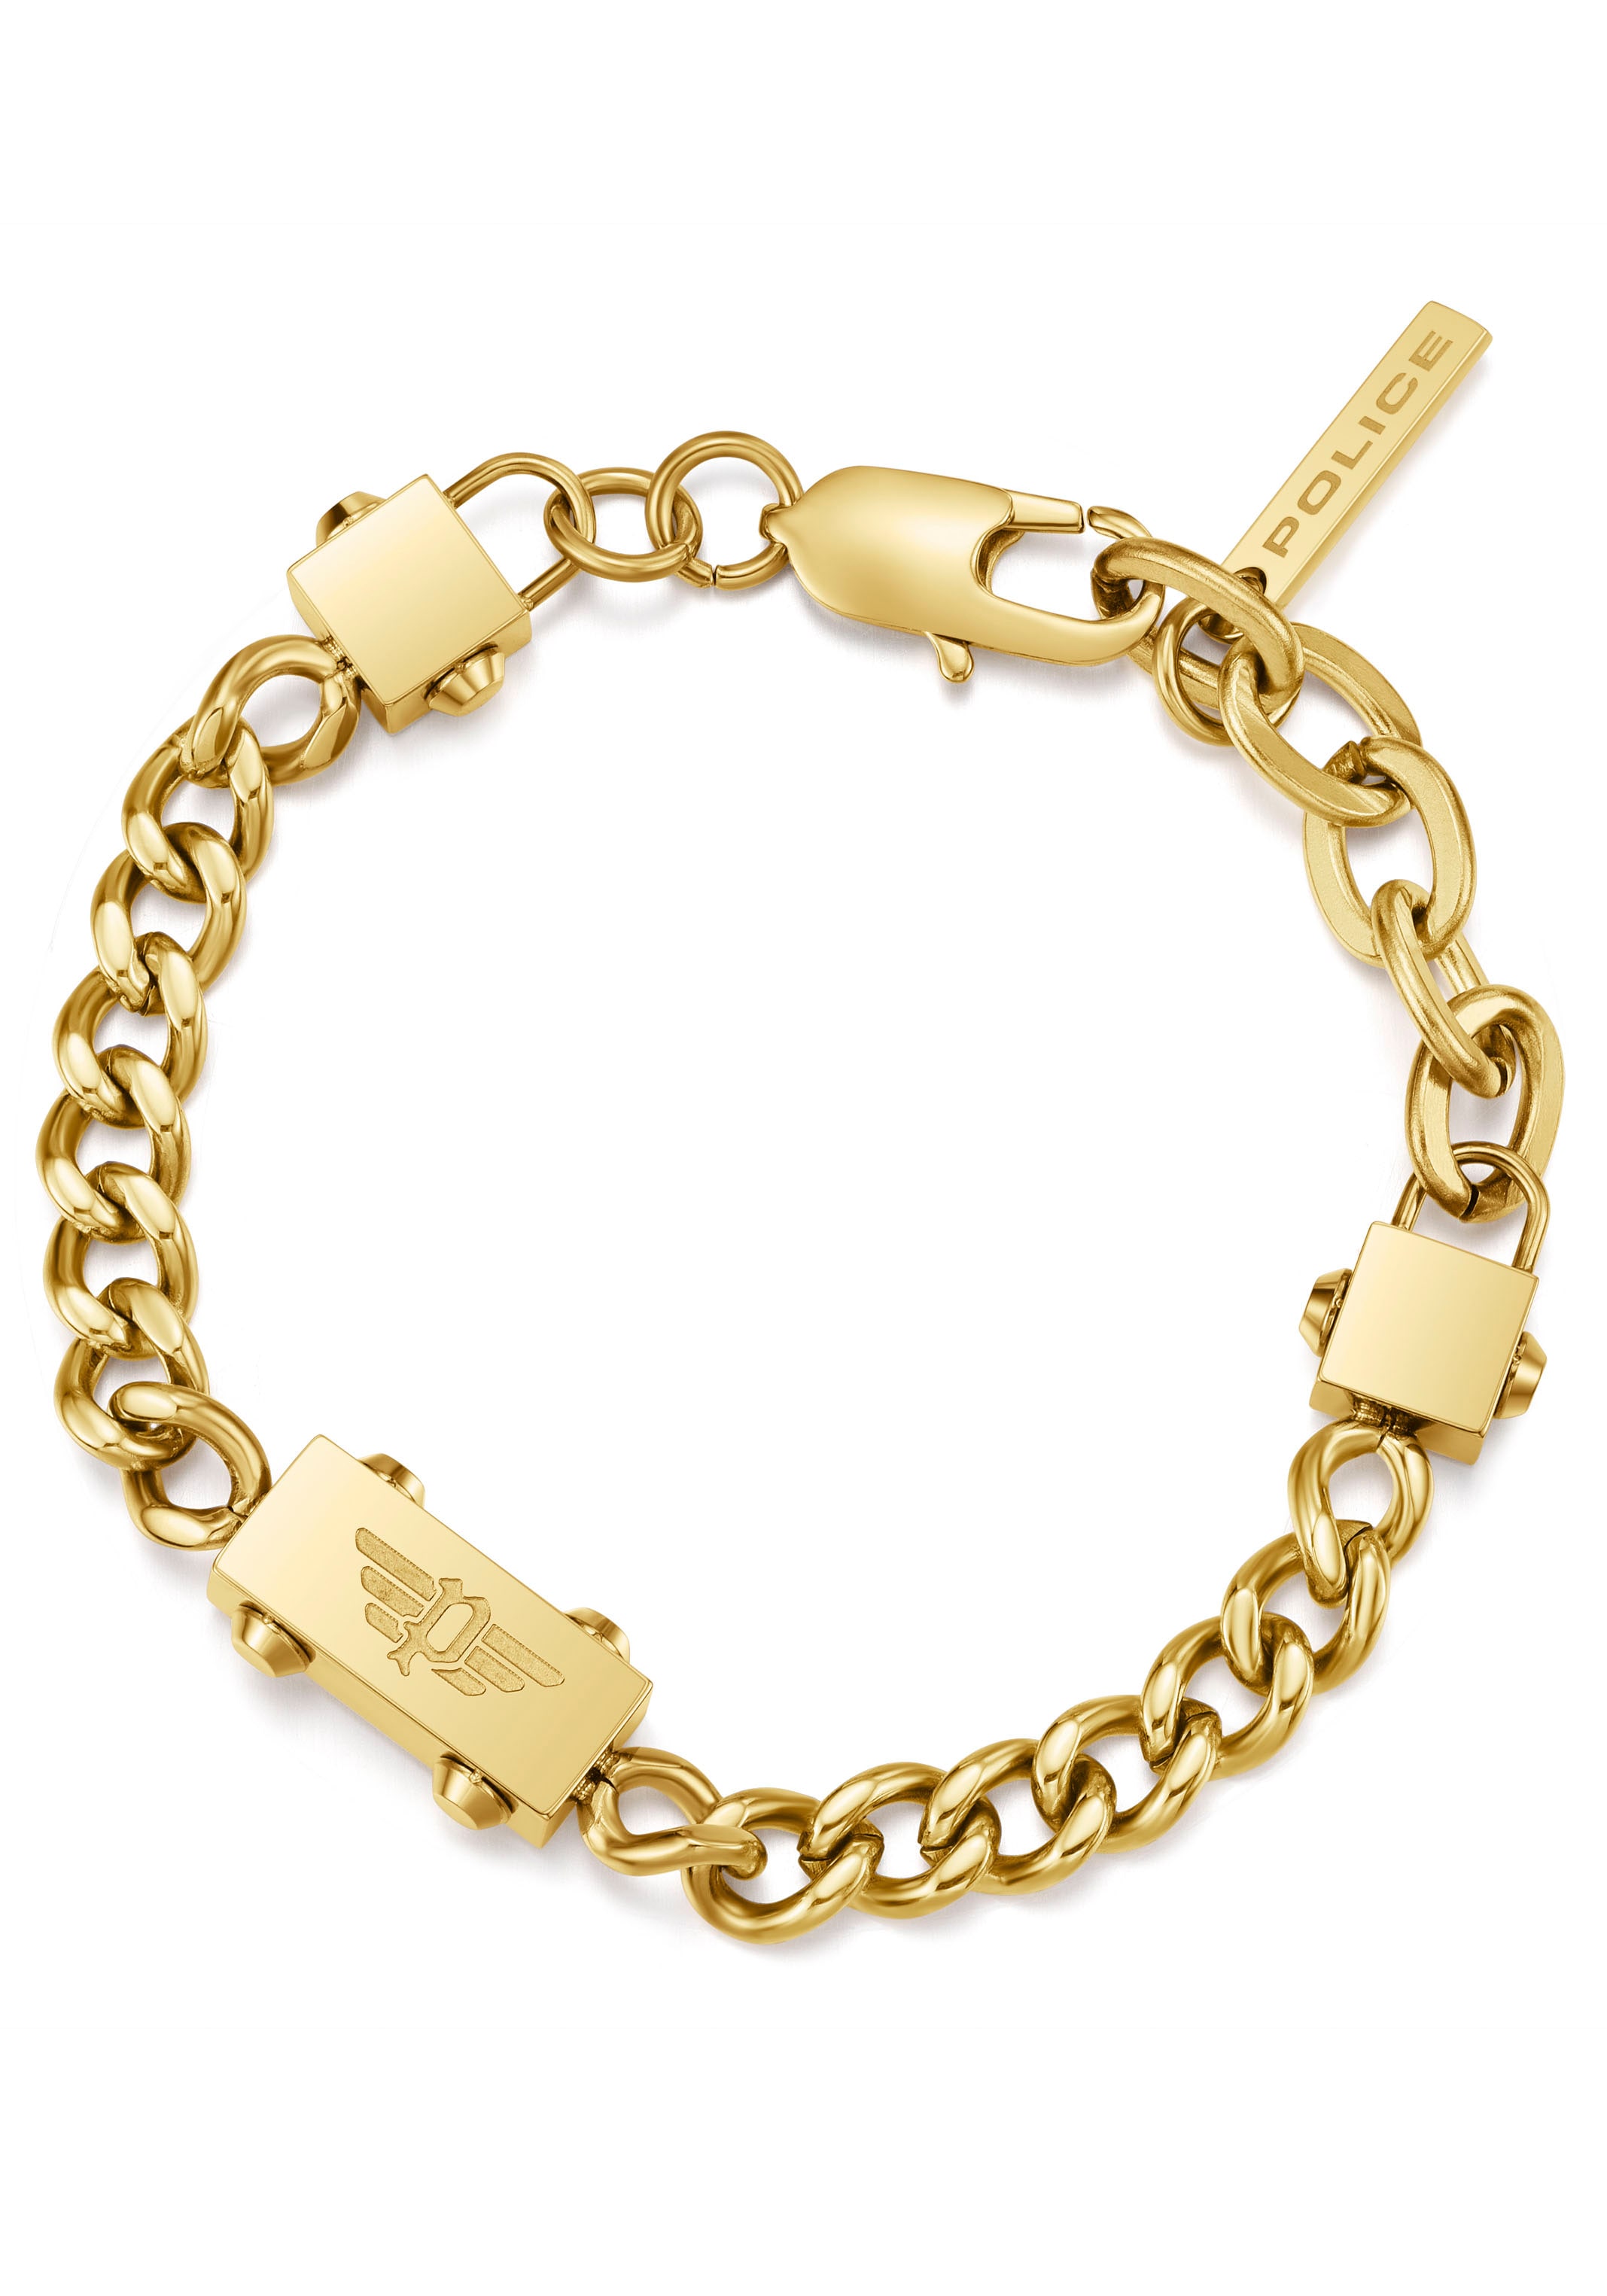 kaufen | BAUR PEAGB0002102, »CHAINED, Police PEAGB0002106« online Armband